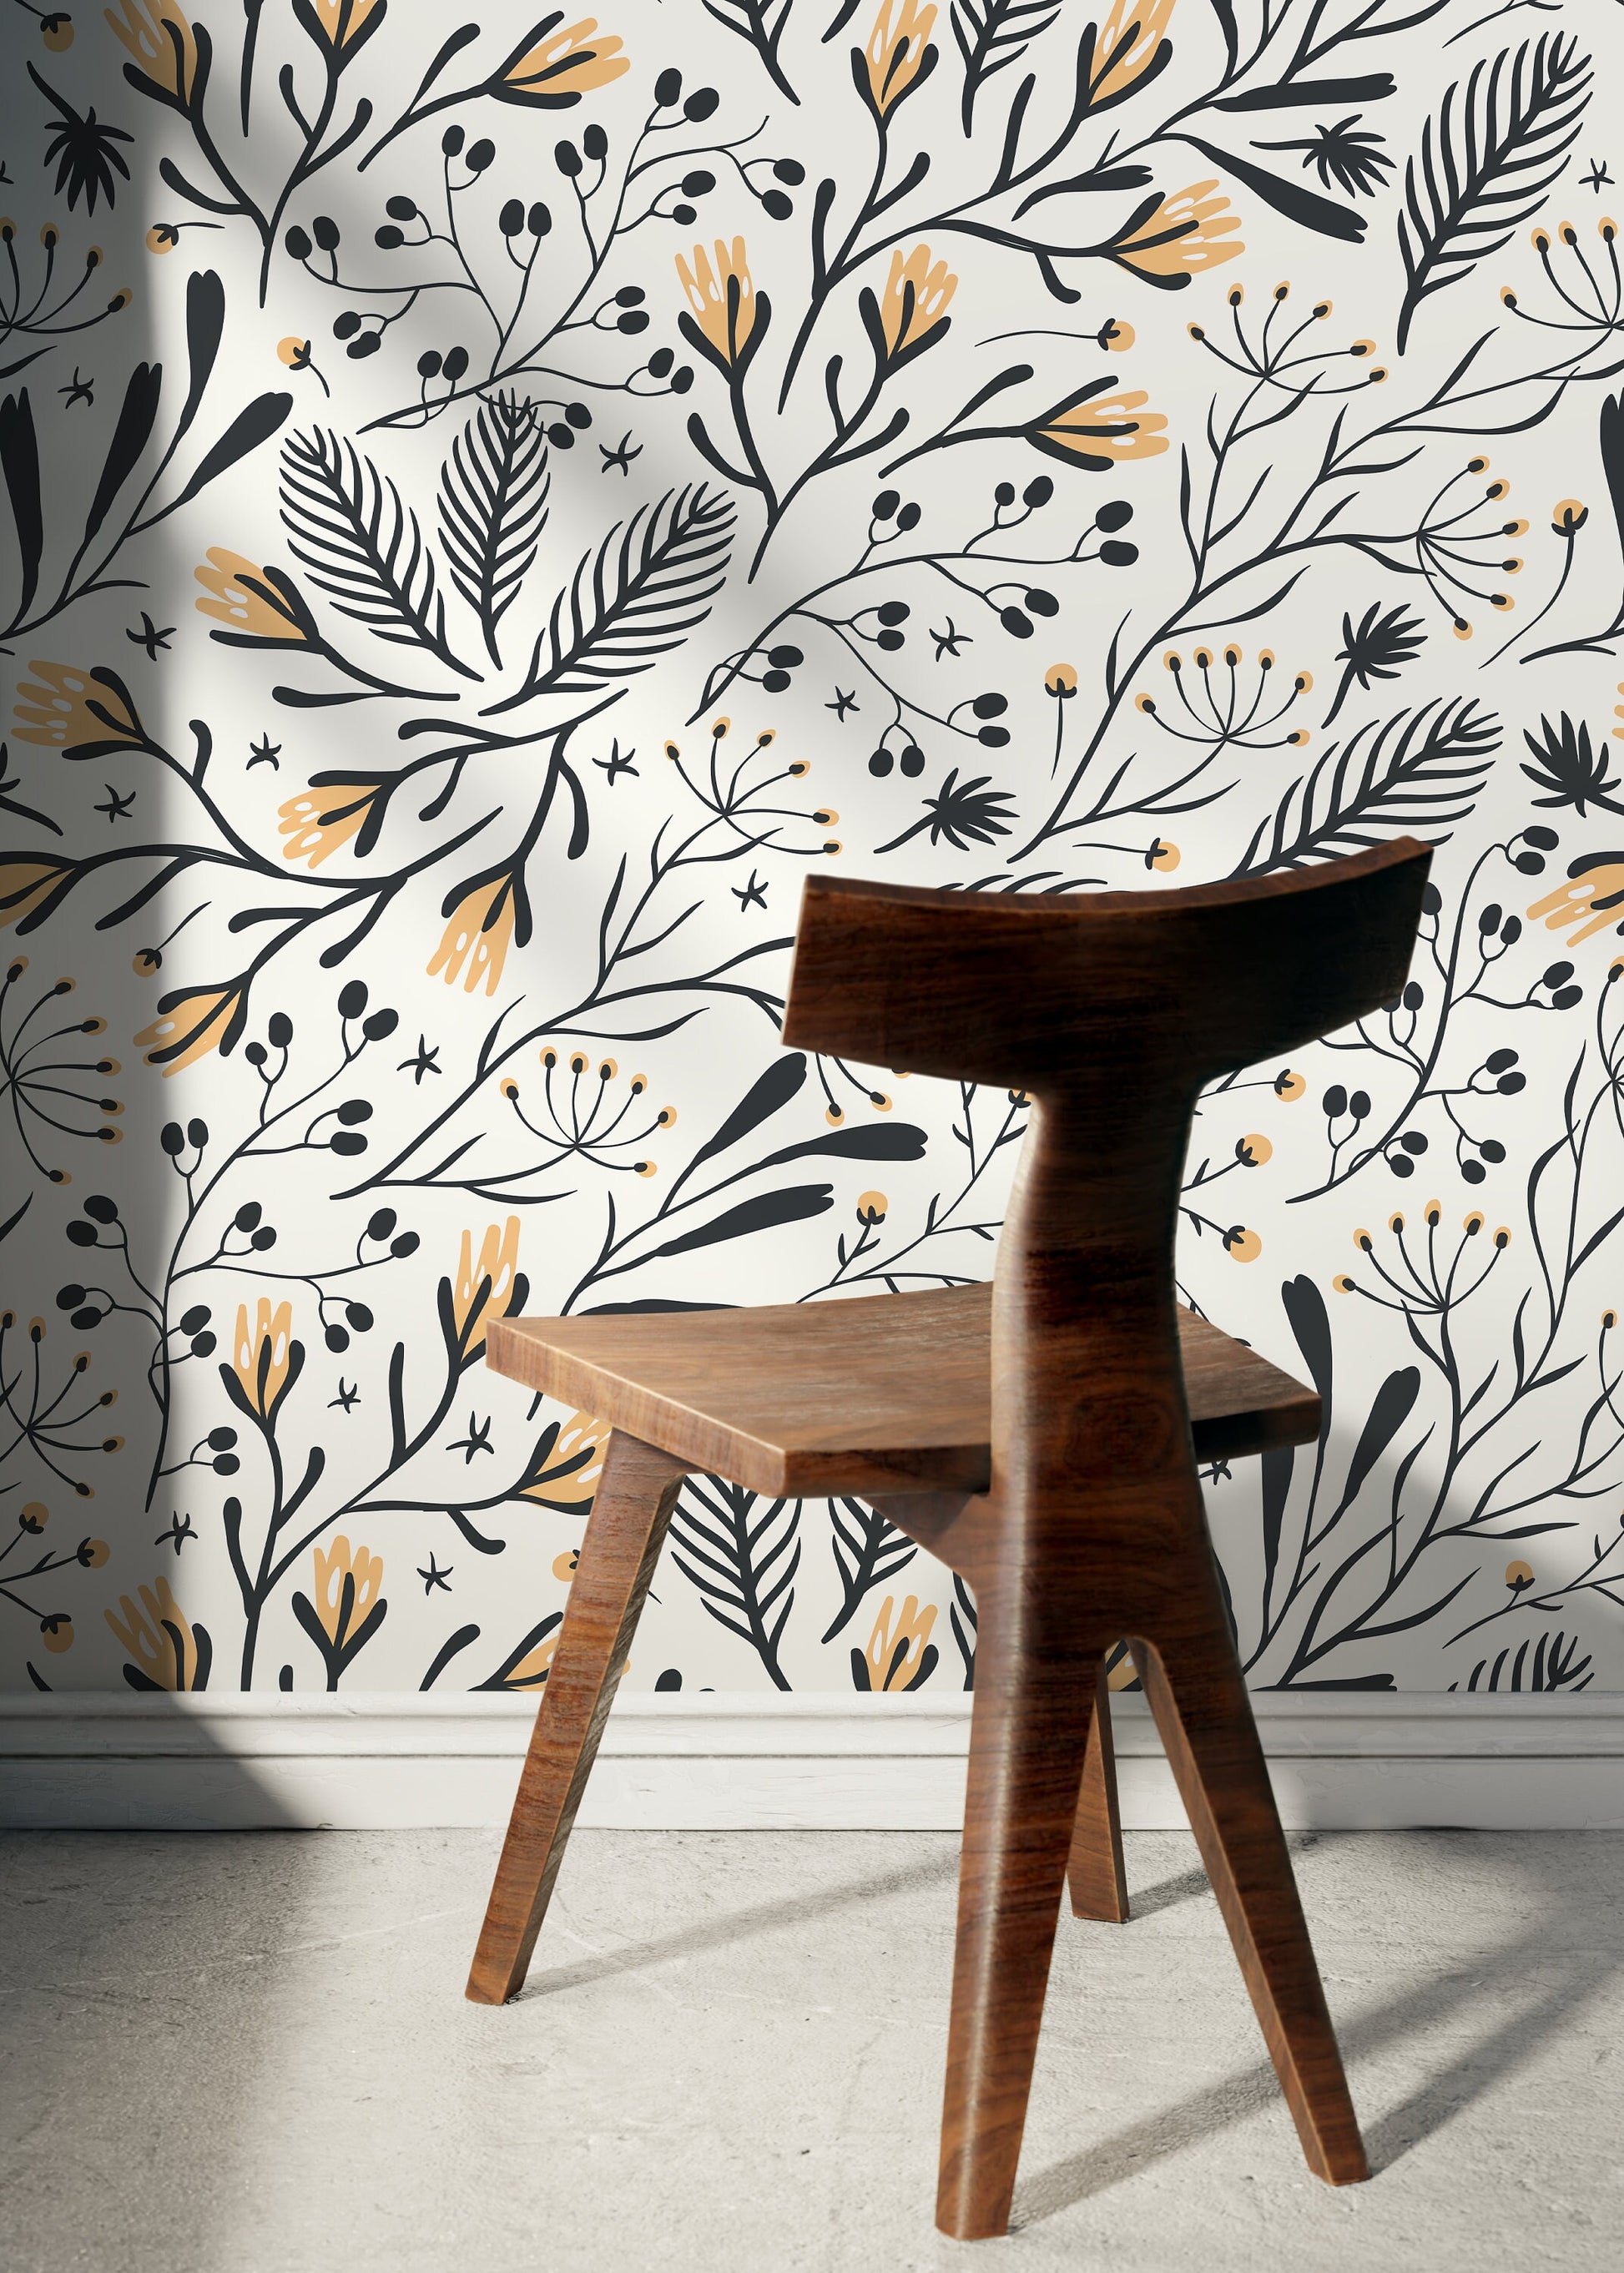 Black and Yellow Floral Wallpaper / Peel and Stick Wallpaper Removable Wallpaper Home Decor Wall Art Wall Decor Room Decor - D280